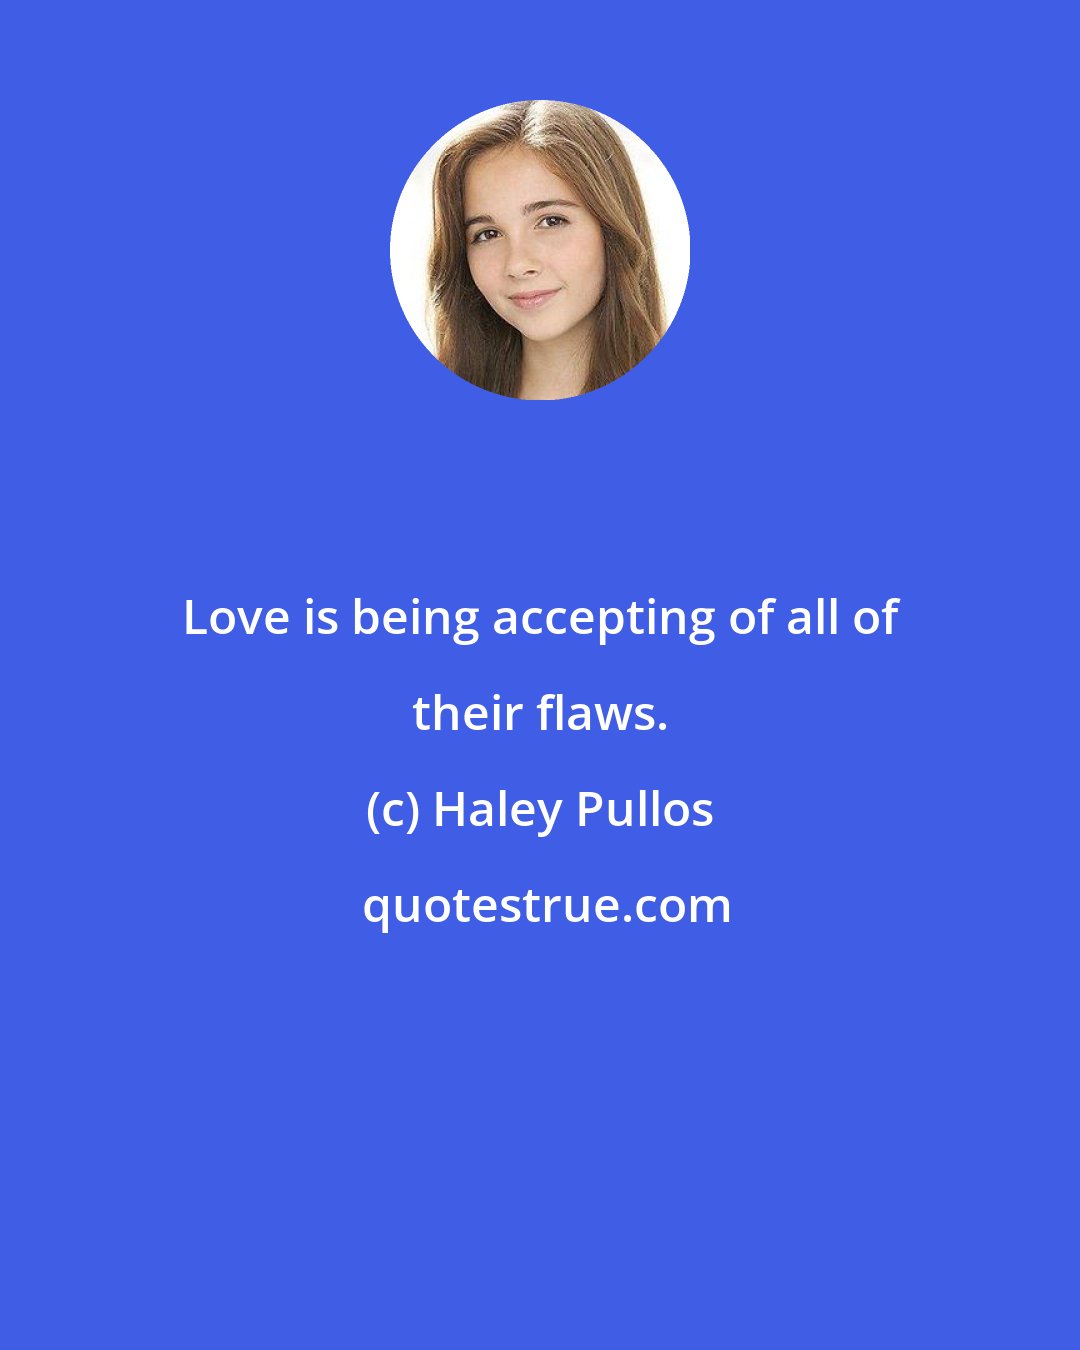 Haley Pullos: Love is being accepting of all of their flaws.